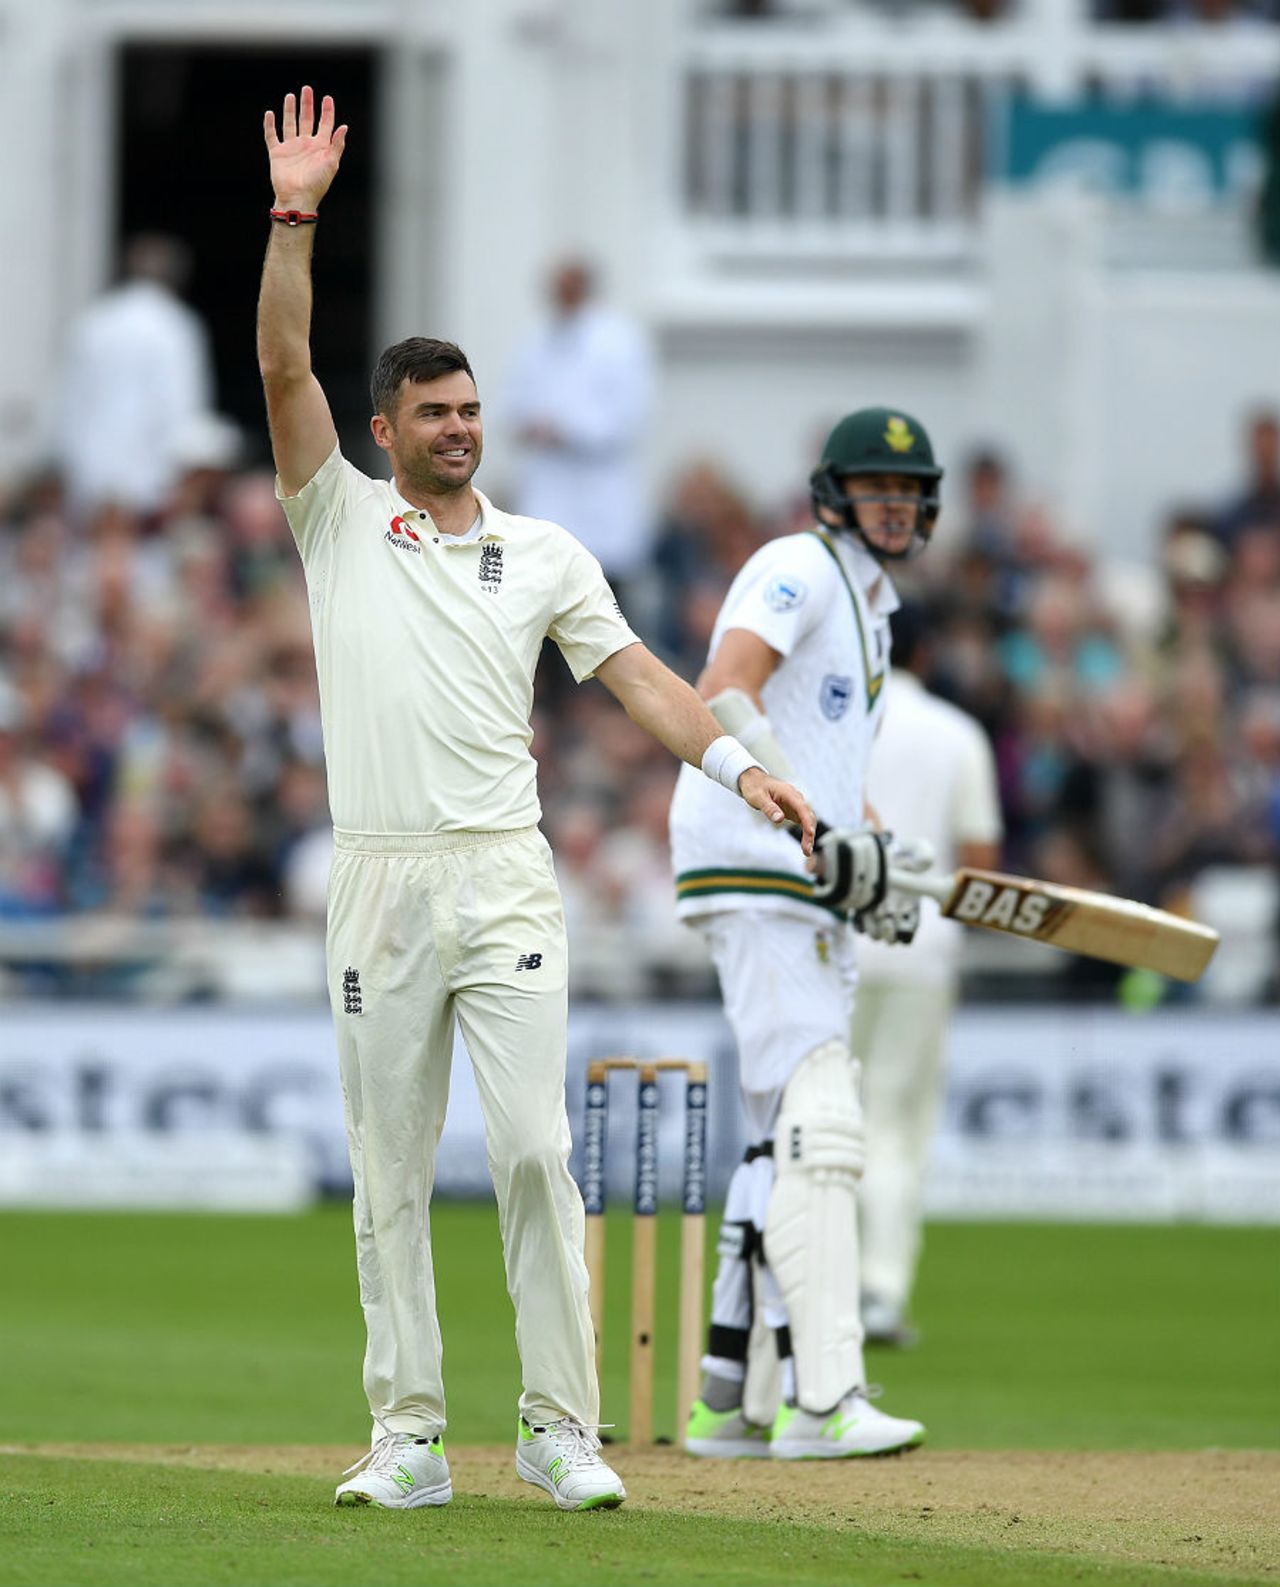 James Anderson completed his five-wicket haul with the scalp of Morne Morkel, England v South Africa, 2nd Investec Test, Trent Bridge, 2nd day, July 15, 2017